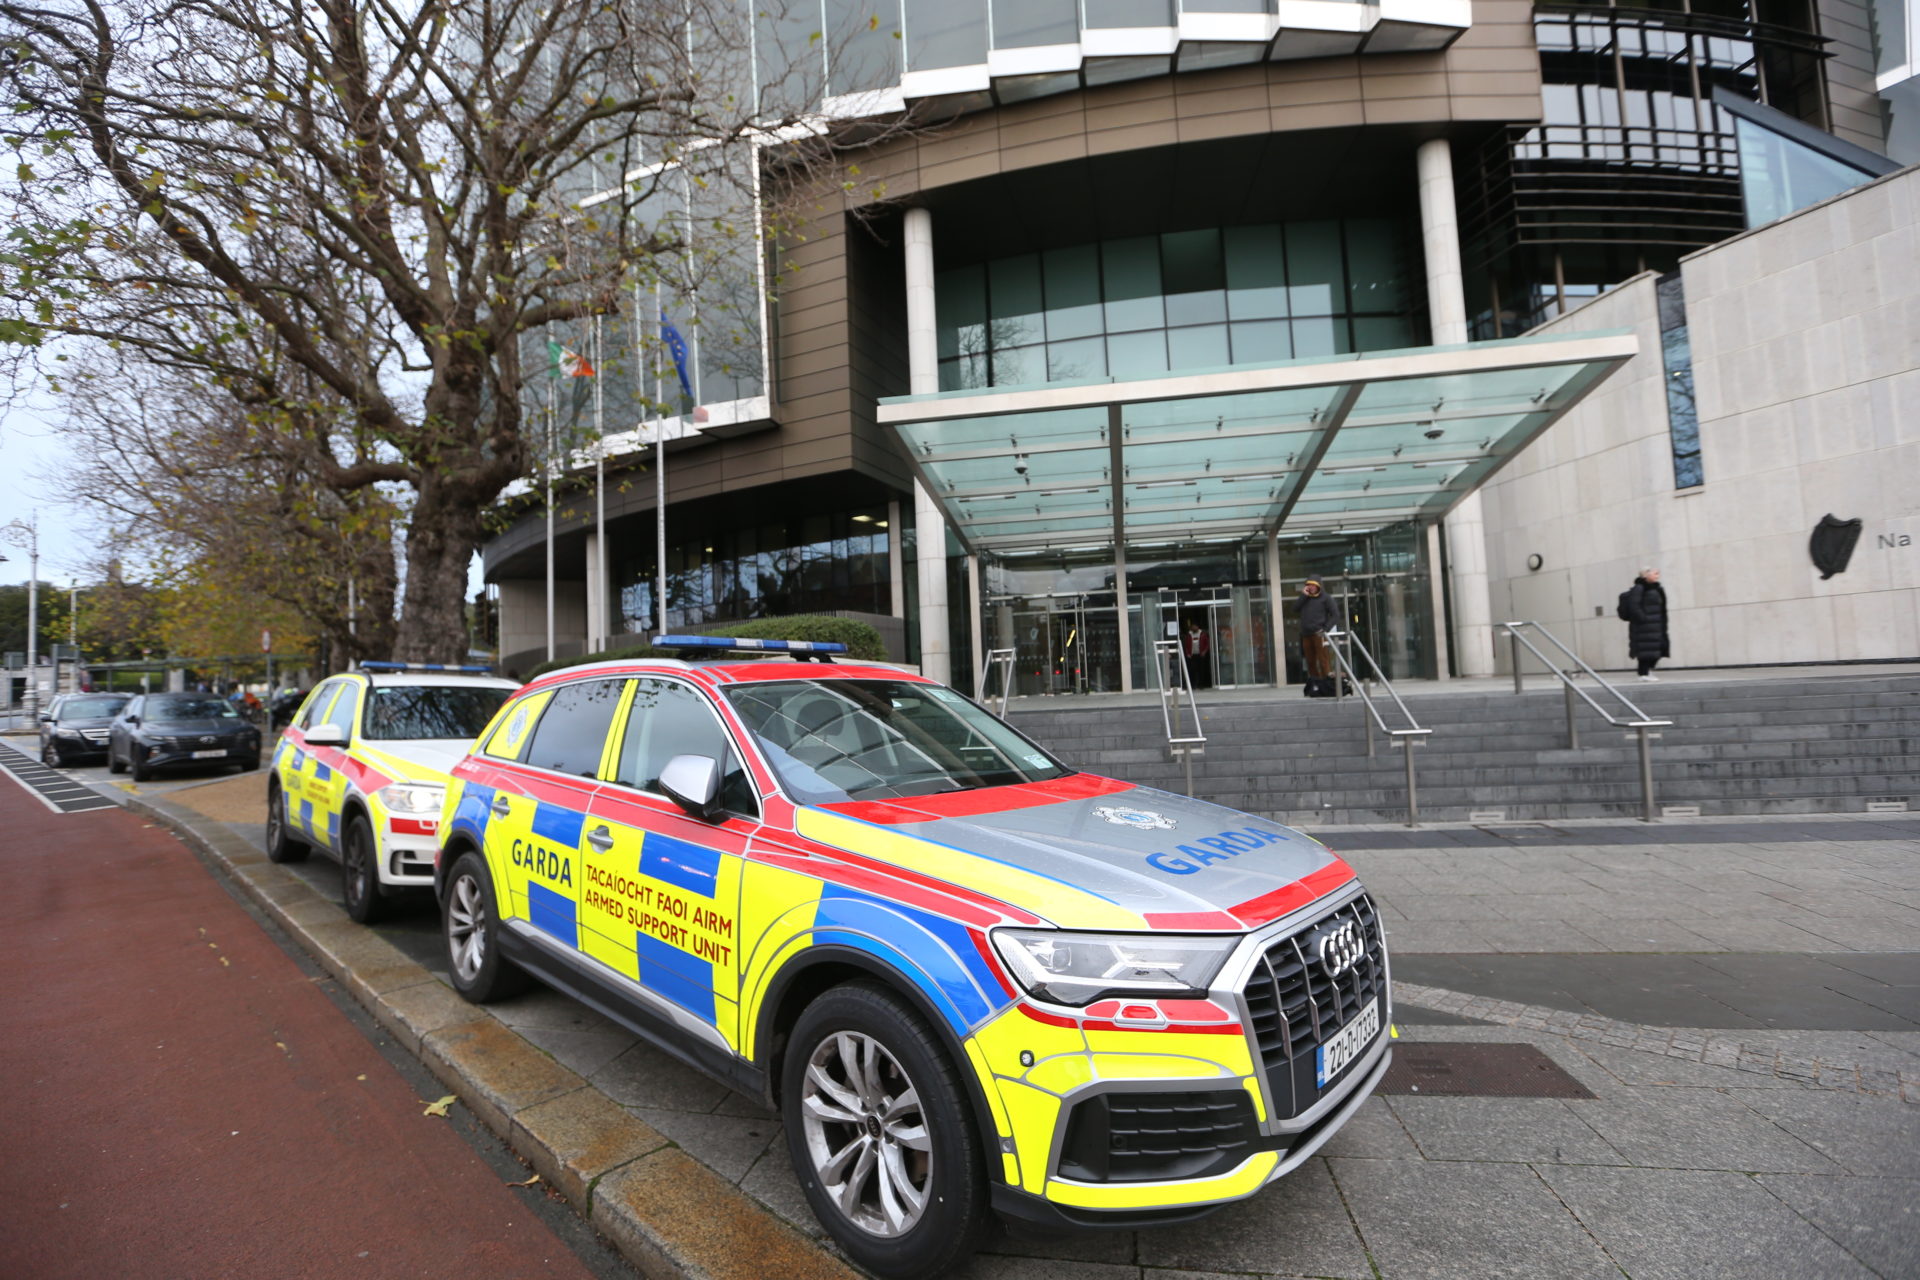 Armed gardai outside the CCJ as the Regency Hotel murder trial continues.